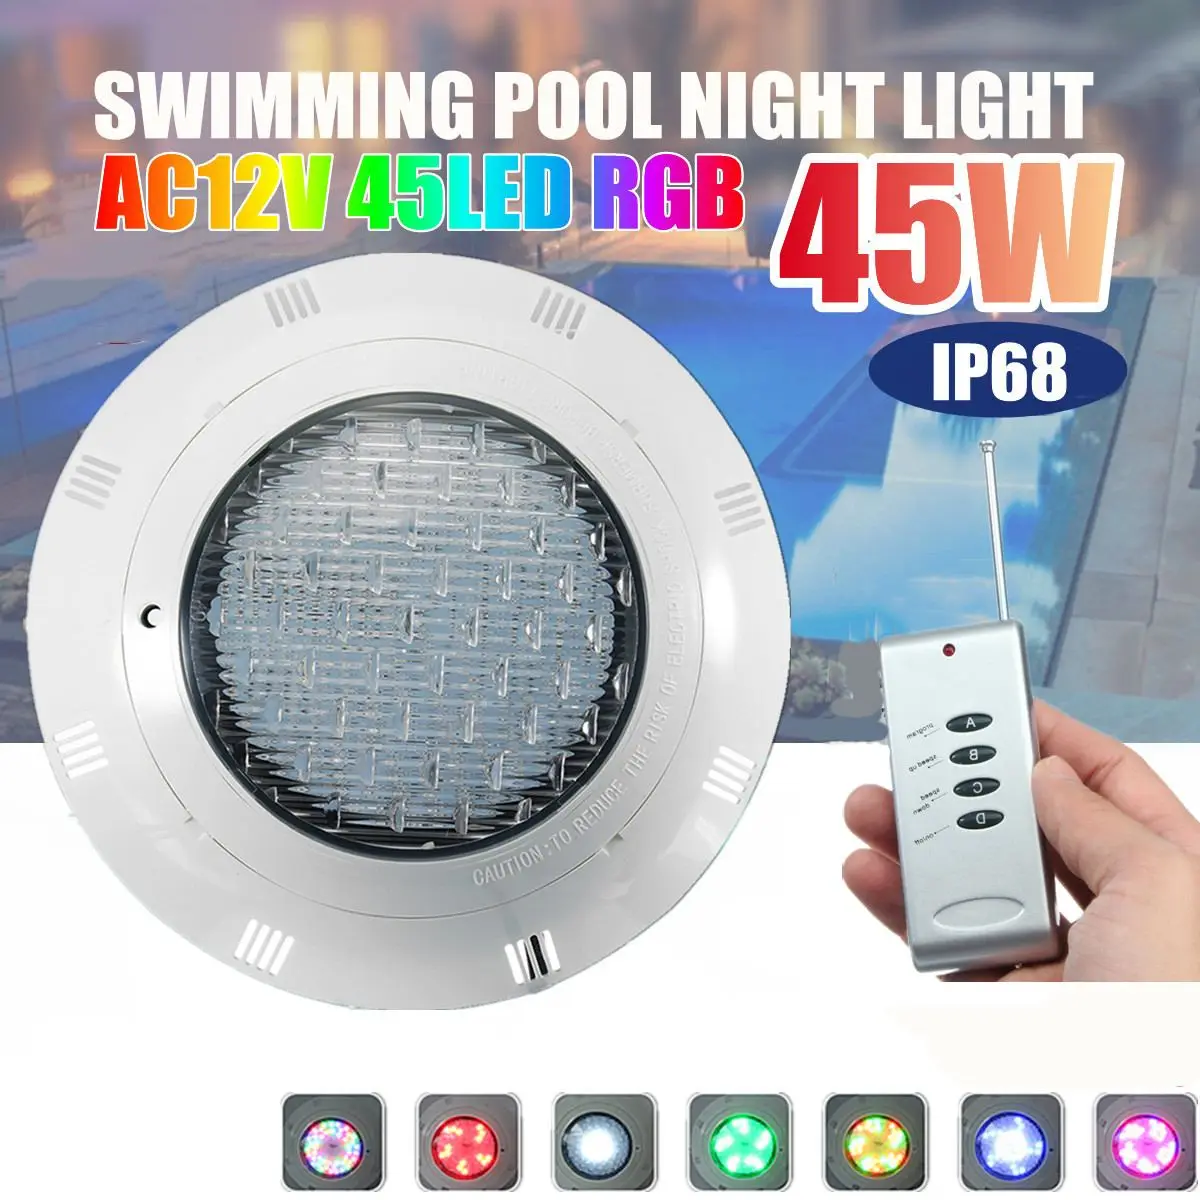 45W LED Underwater Swimming Pool Lights RGB AC12V Color Changing IP68 Waterproof Lamp with Remote Control Decoration Lighting